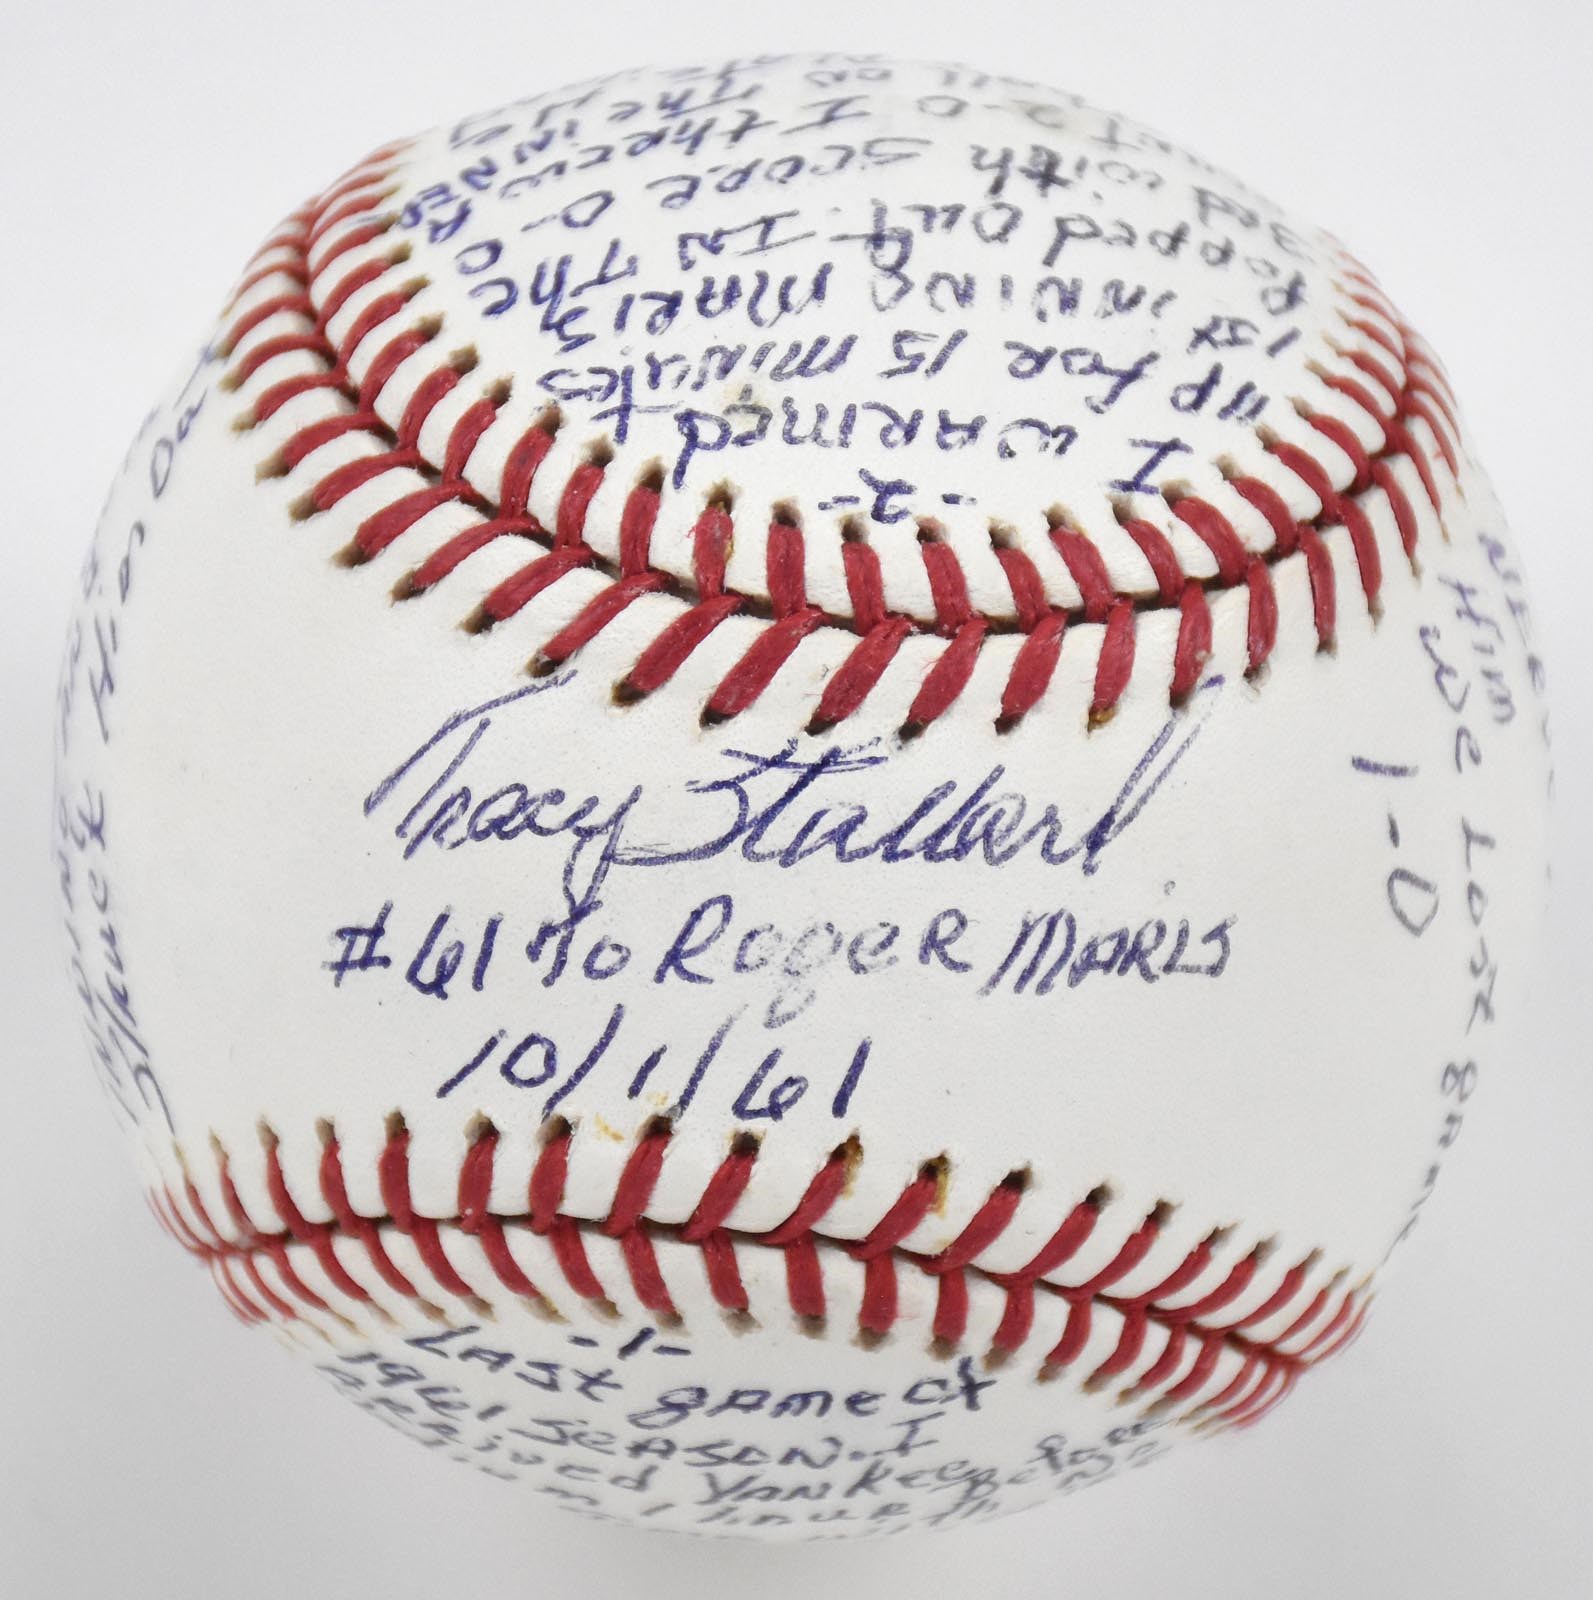 - Roger Maris's 61'st Home Run "Story-Ball" done by Tracy Stallard